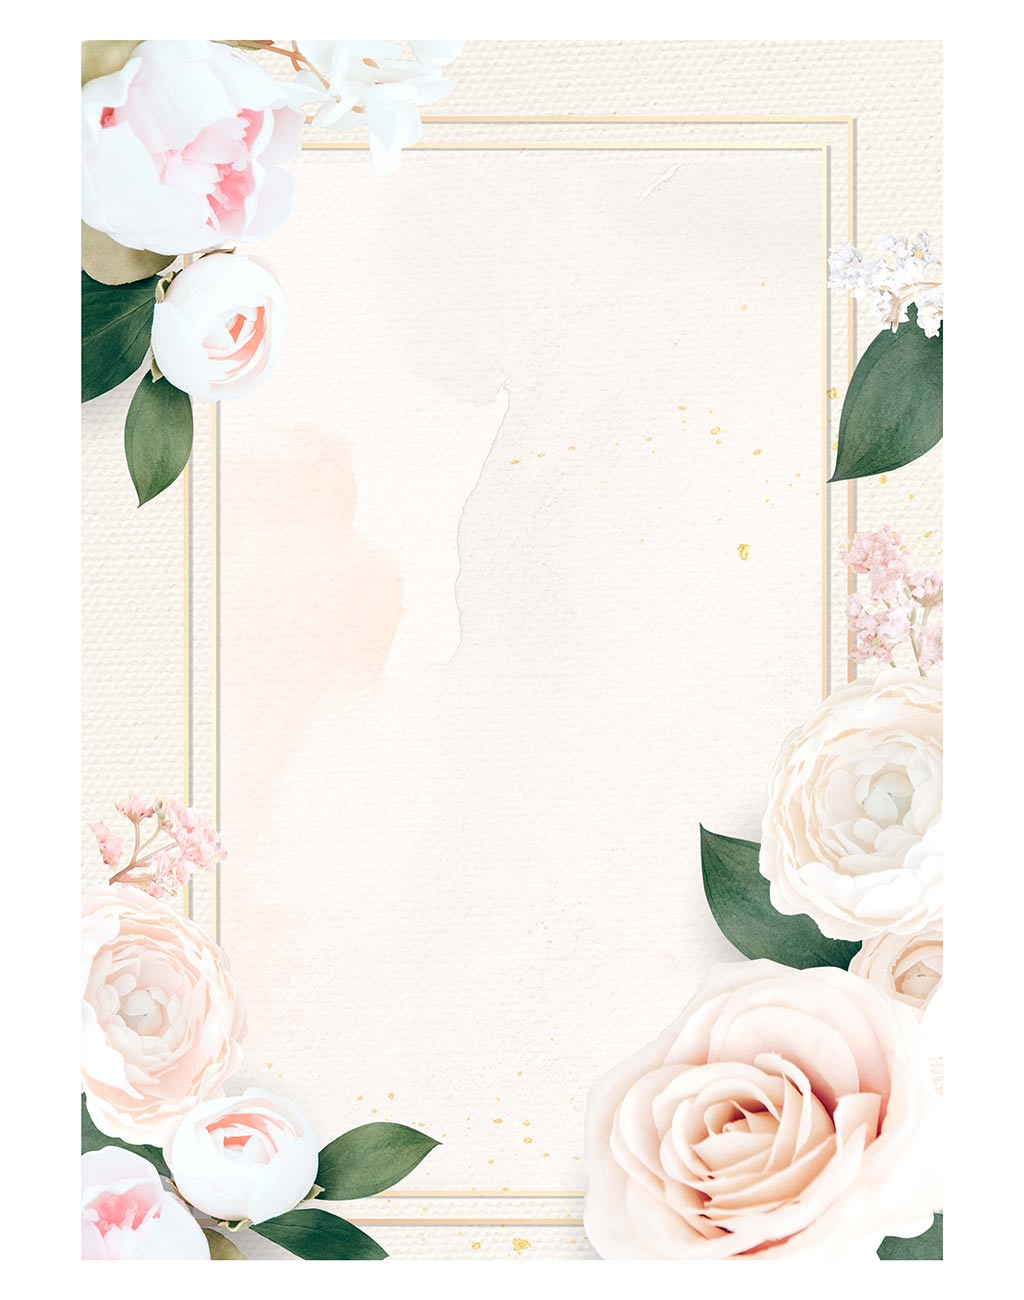 Floral Frame on Marble Welcome Board | Nkabo Graphics